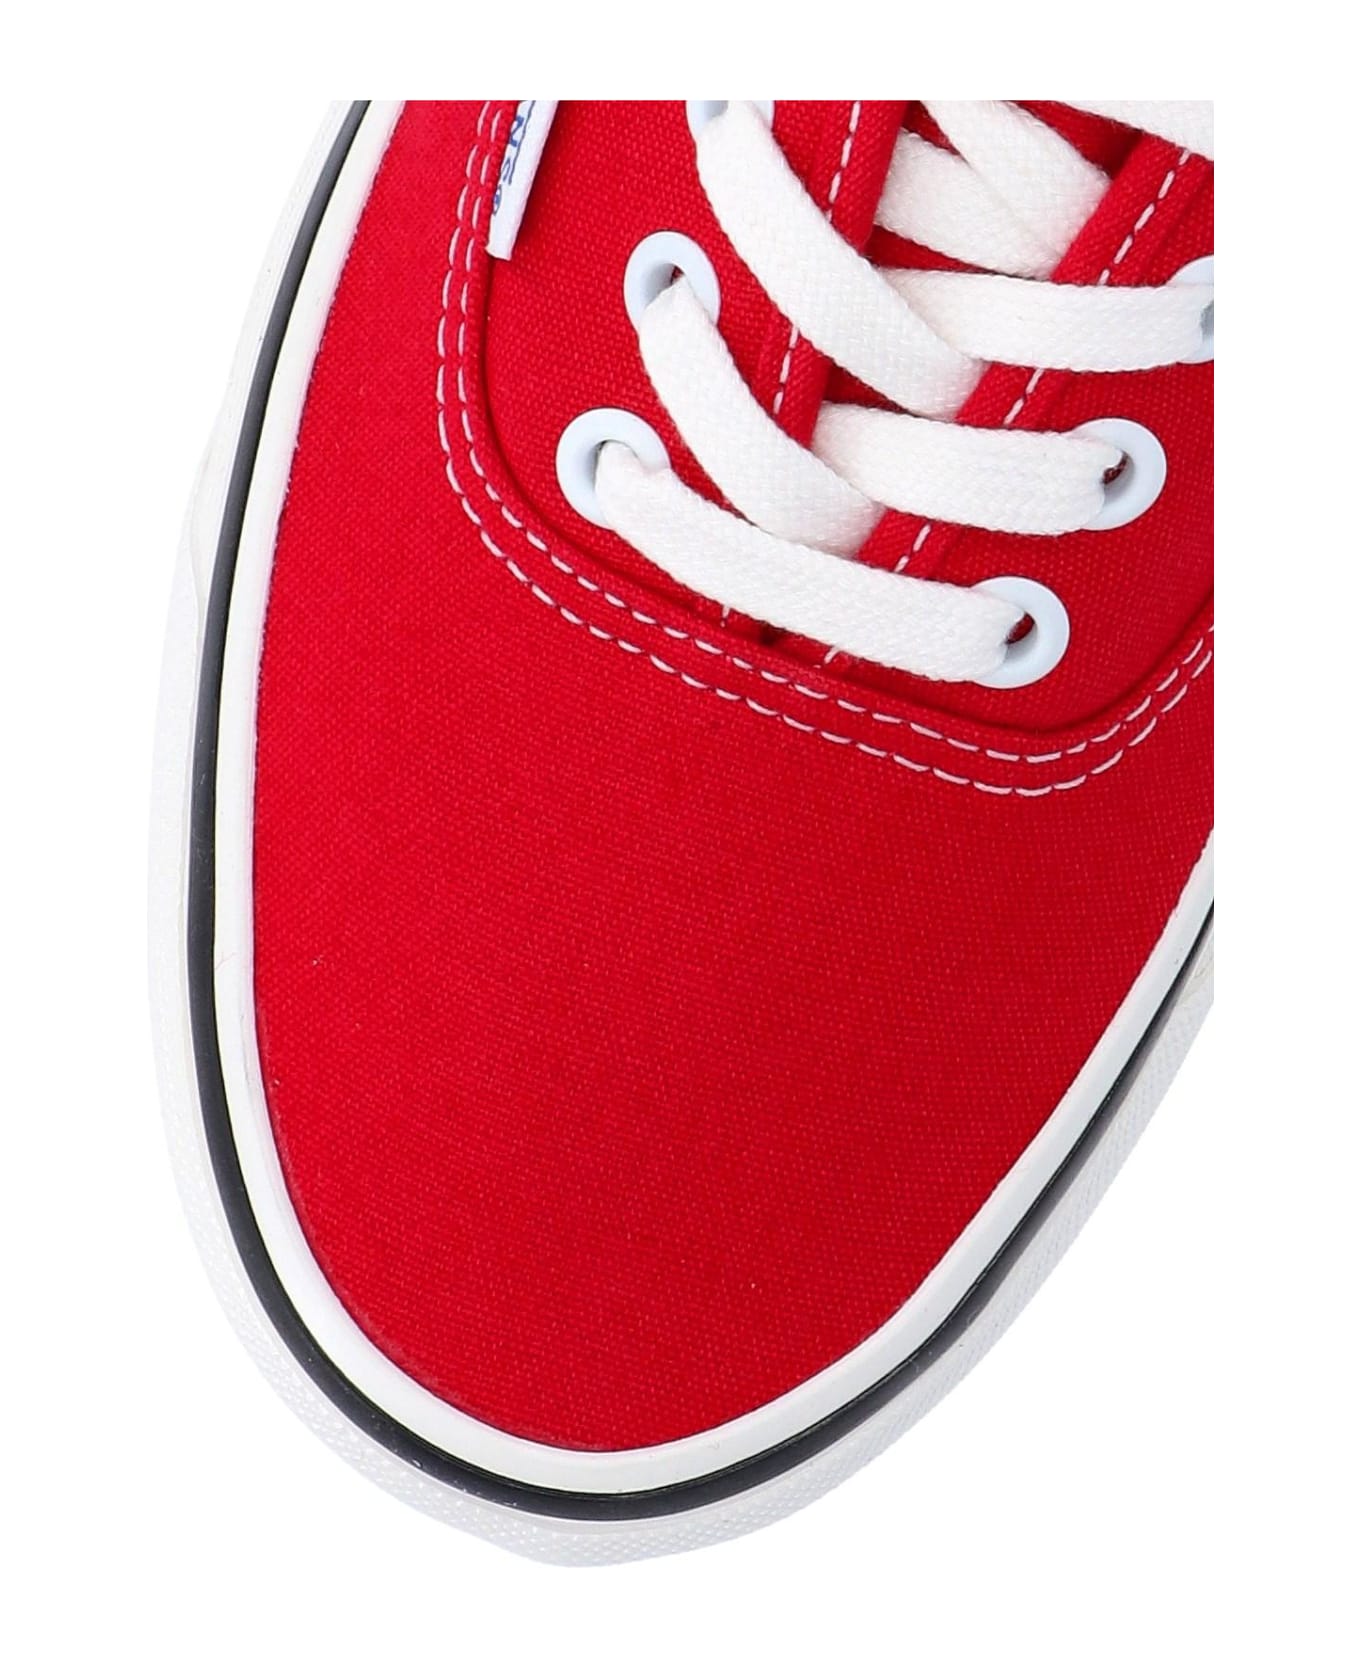 Vans 'anaheim Factory Authentic 44 Dx' Sneakers - Red スニーカー